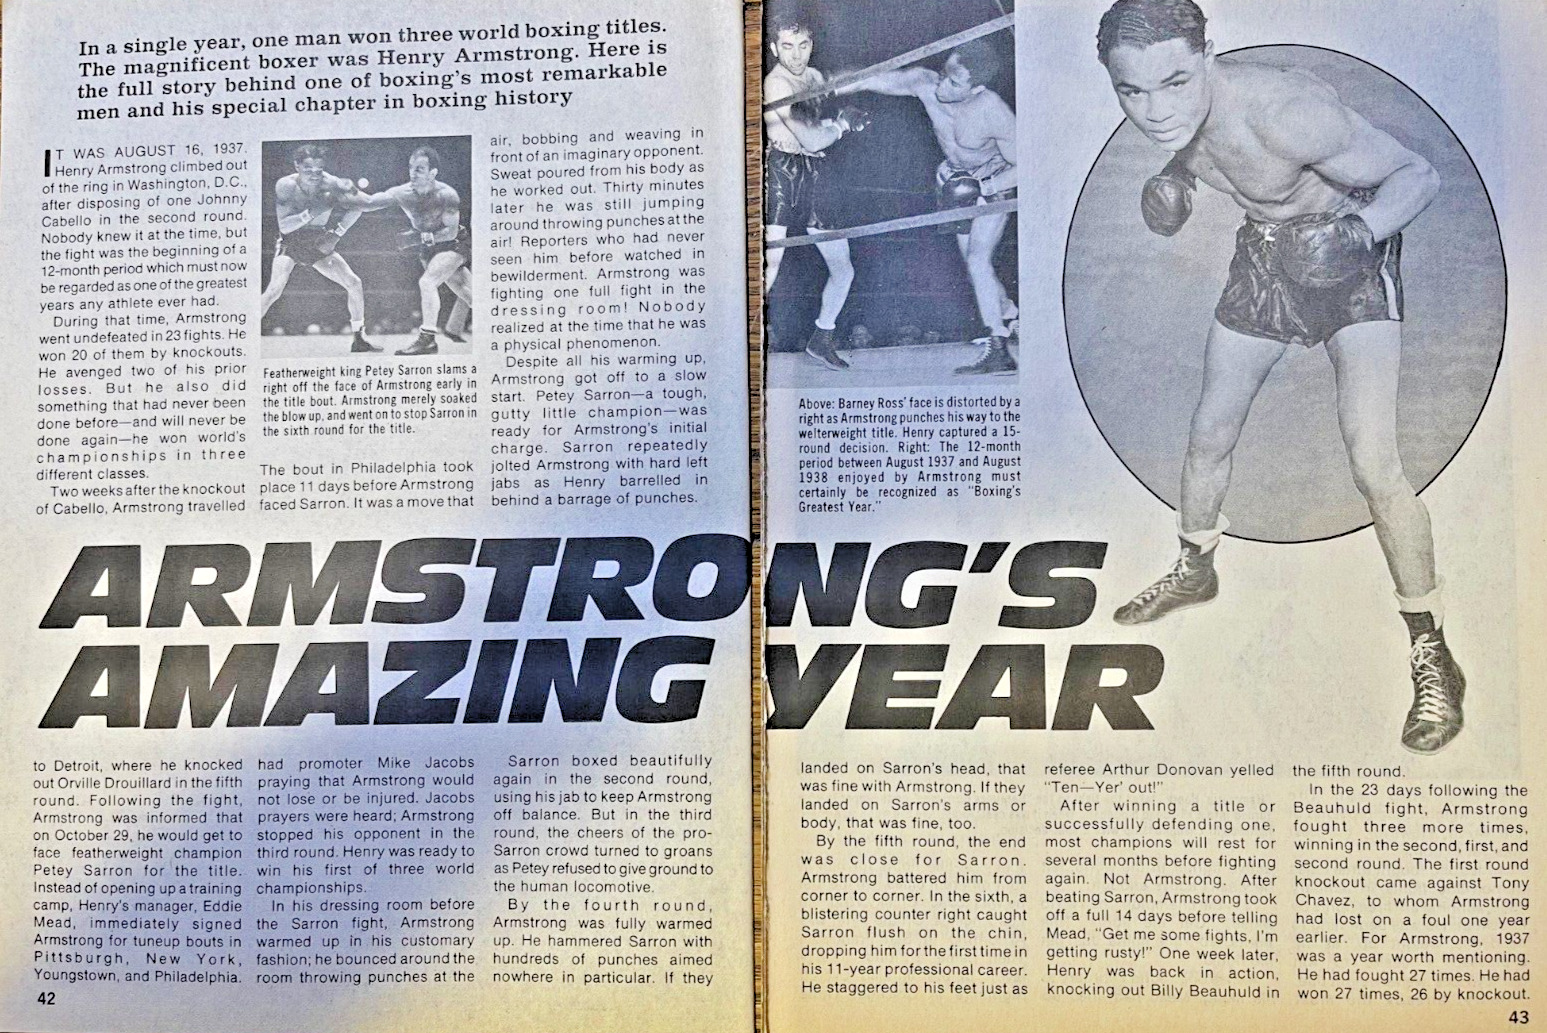 1981 Boxer Henry Armstrong